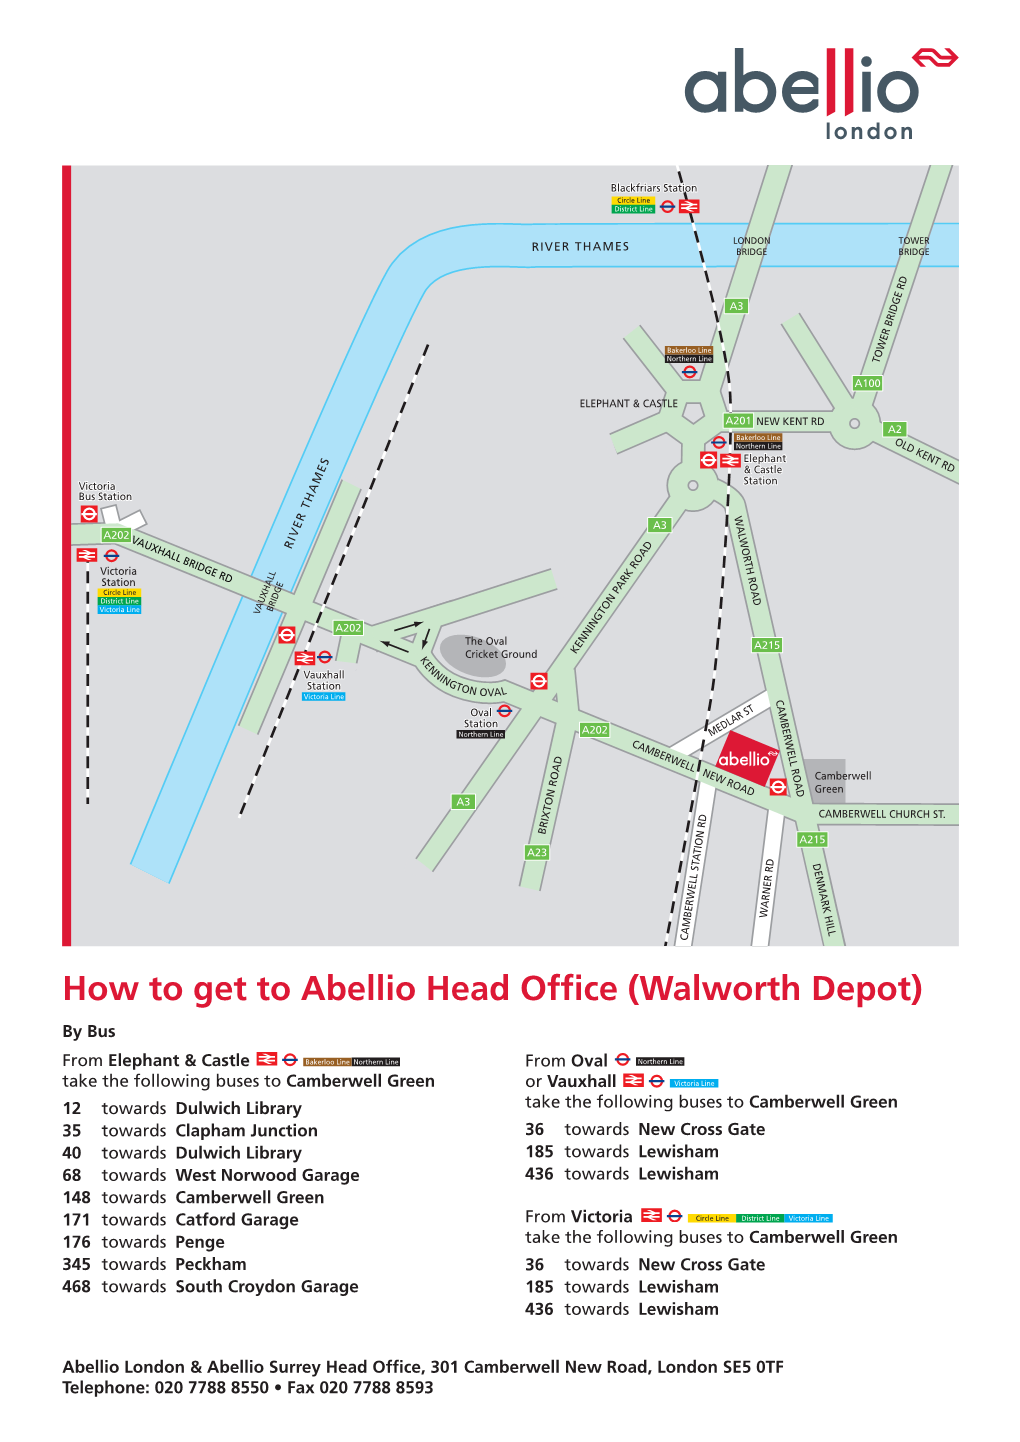 How to Get to Abellio Head Office (Walworth Depot)